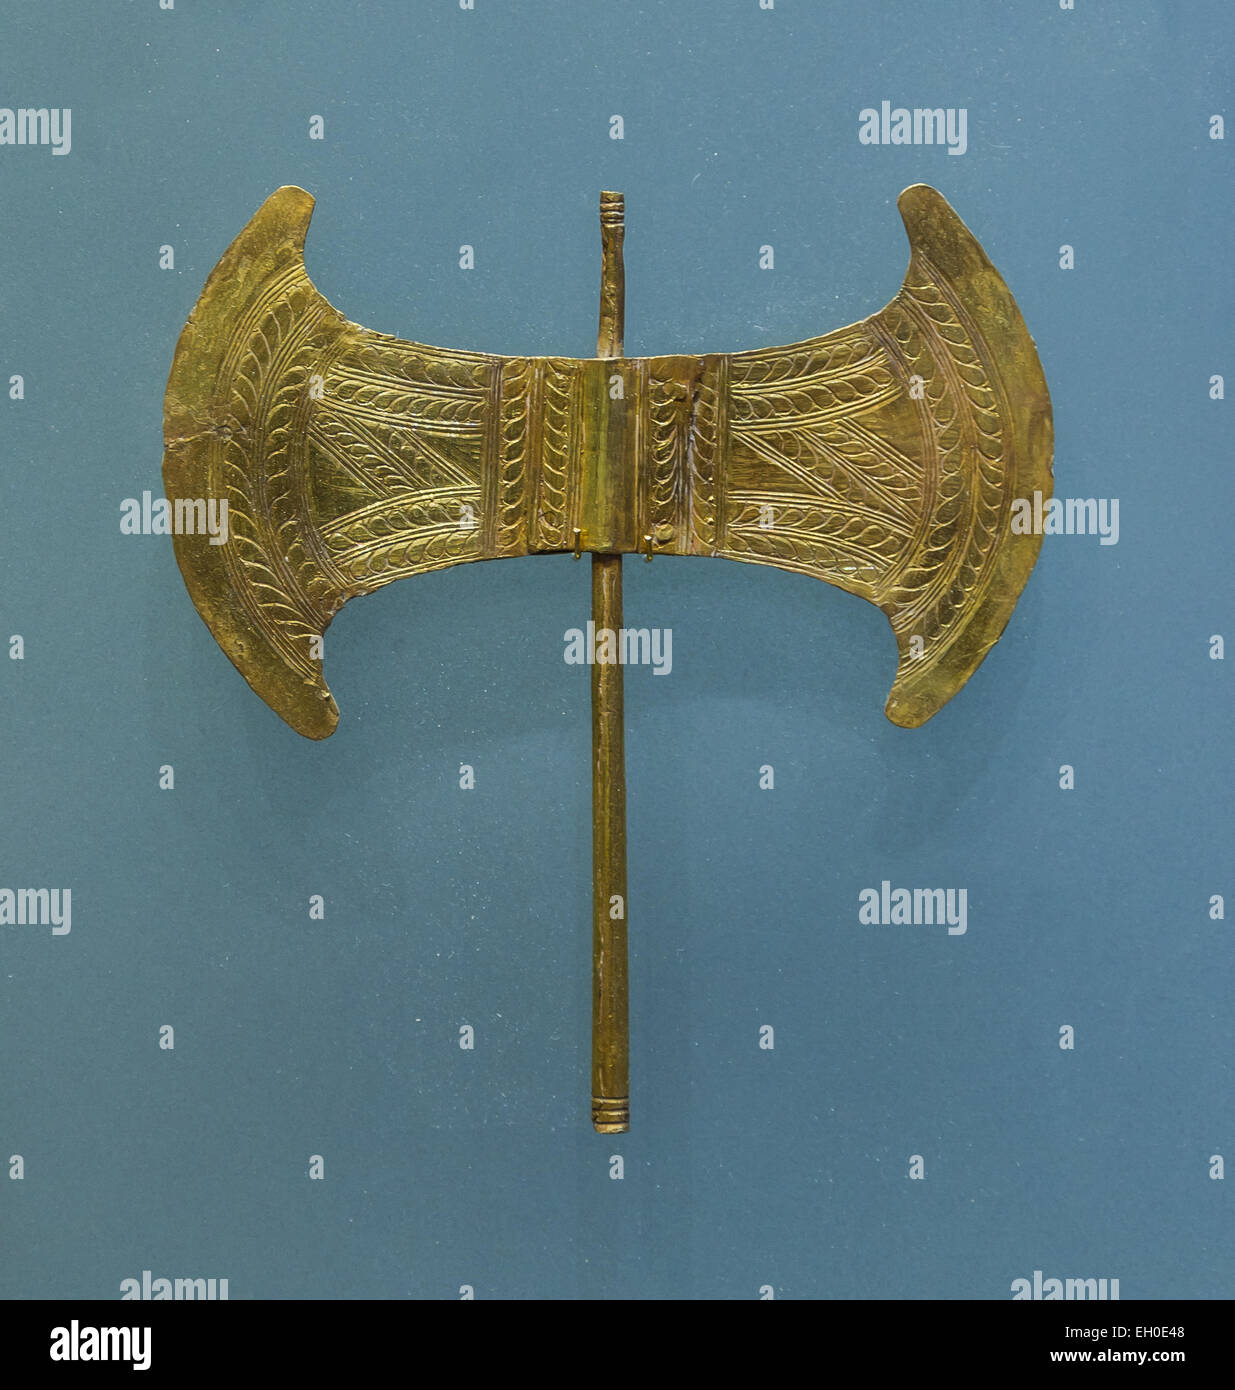 A small golden double head minoan axe. Votive jewel. Found in Archalokori cave, 1700 - 1450 BCE. Stock Photo